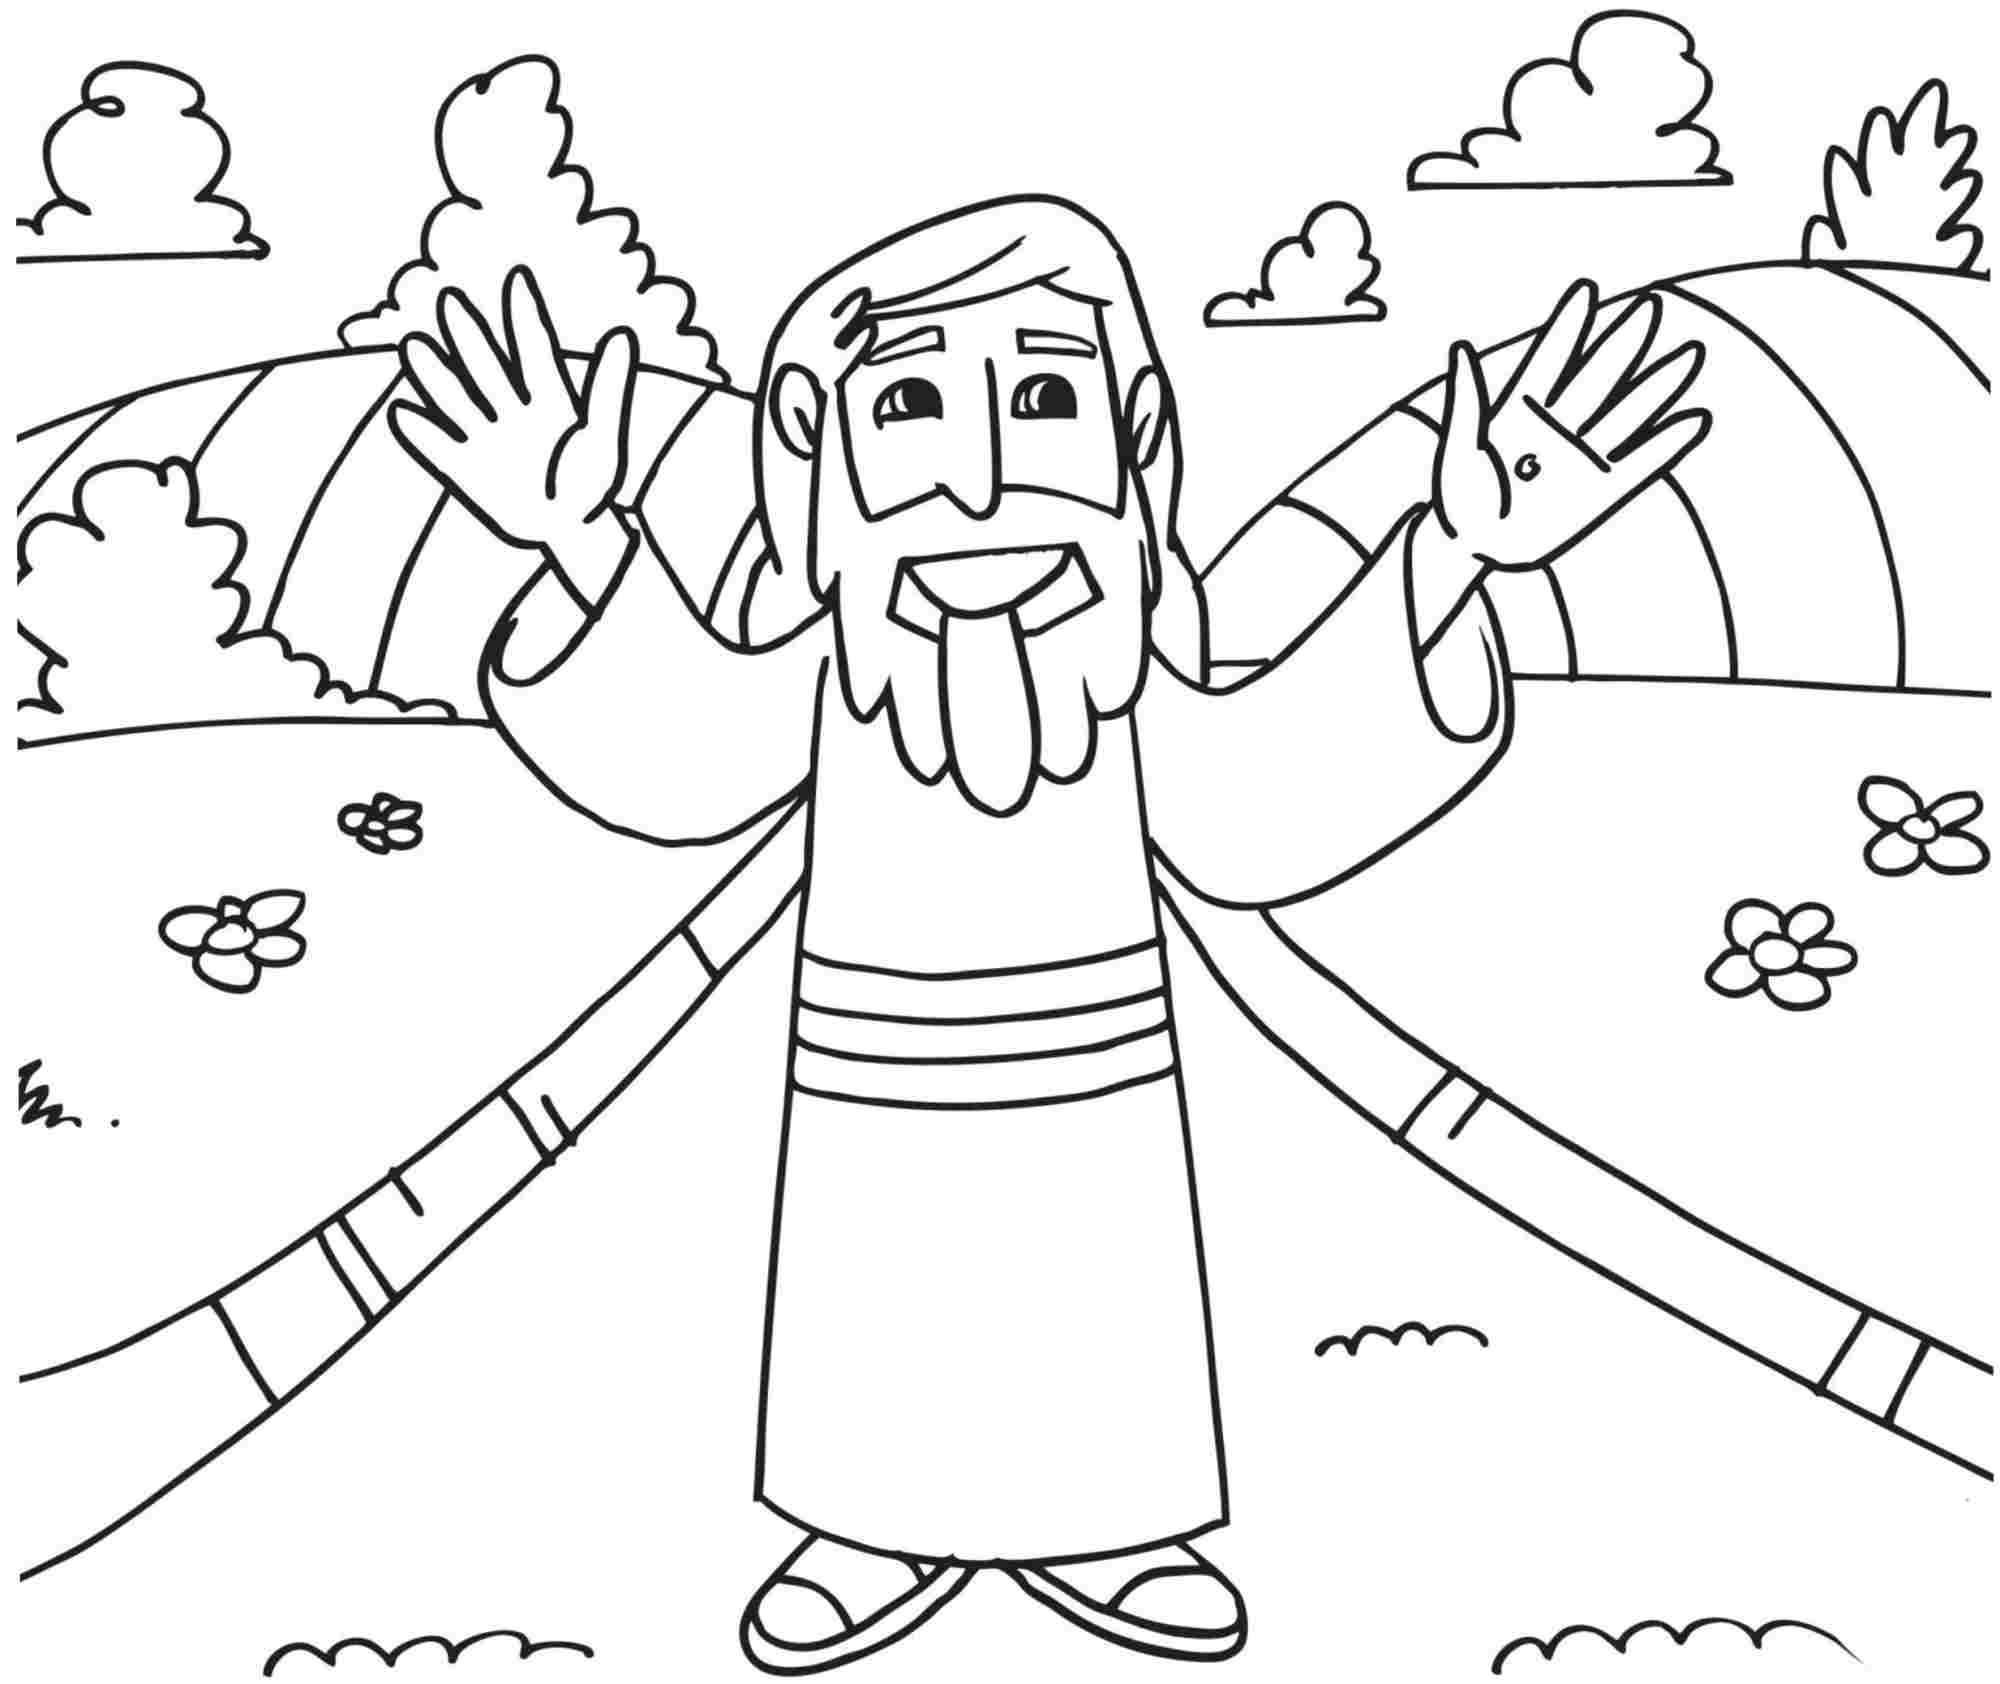 Christian Coloring Pages For Toddlers Coloring Ideas Printable Christian Coloring Pages Stunning